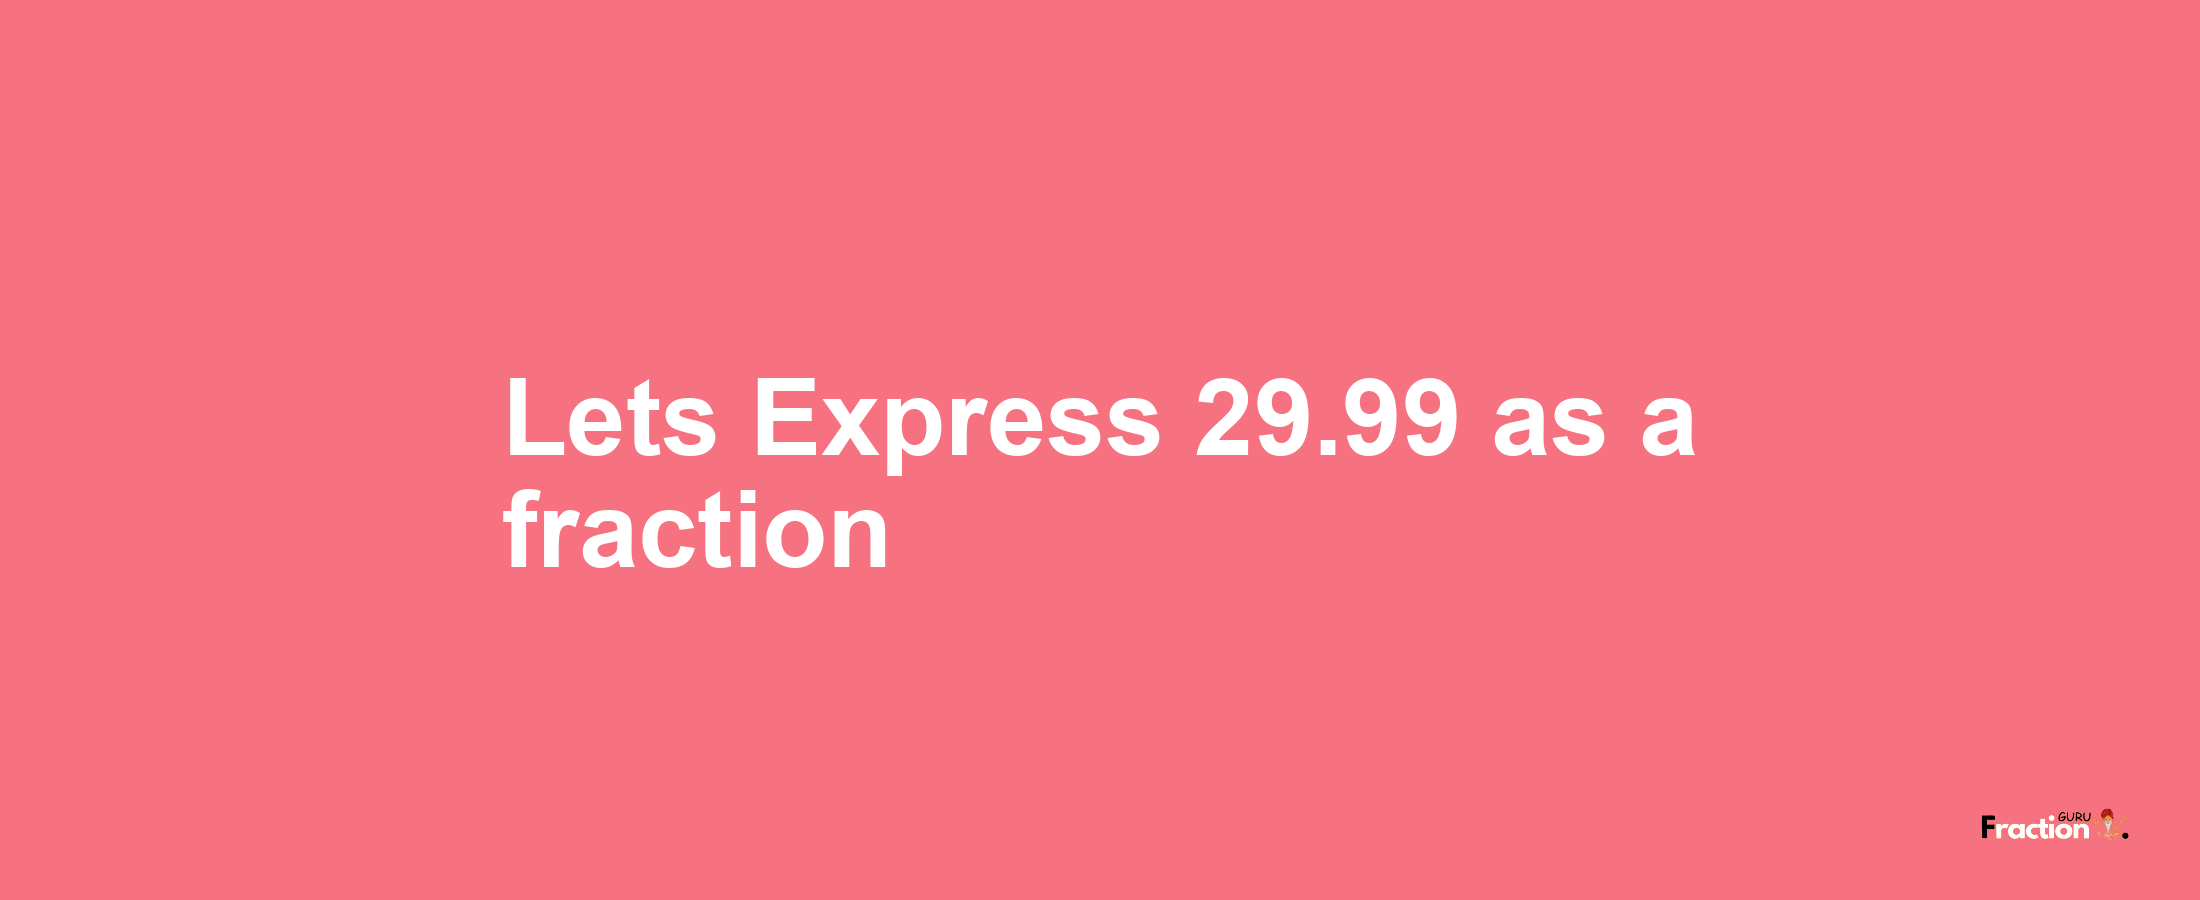 Lets Express 29.99 as afraction